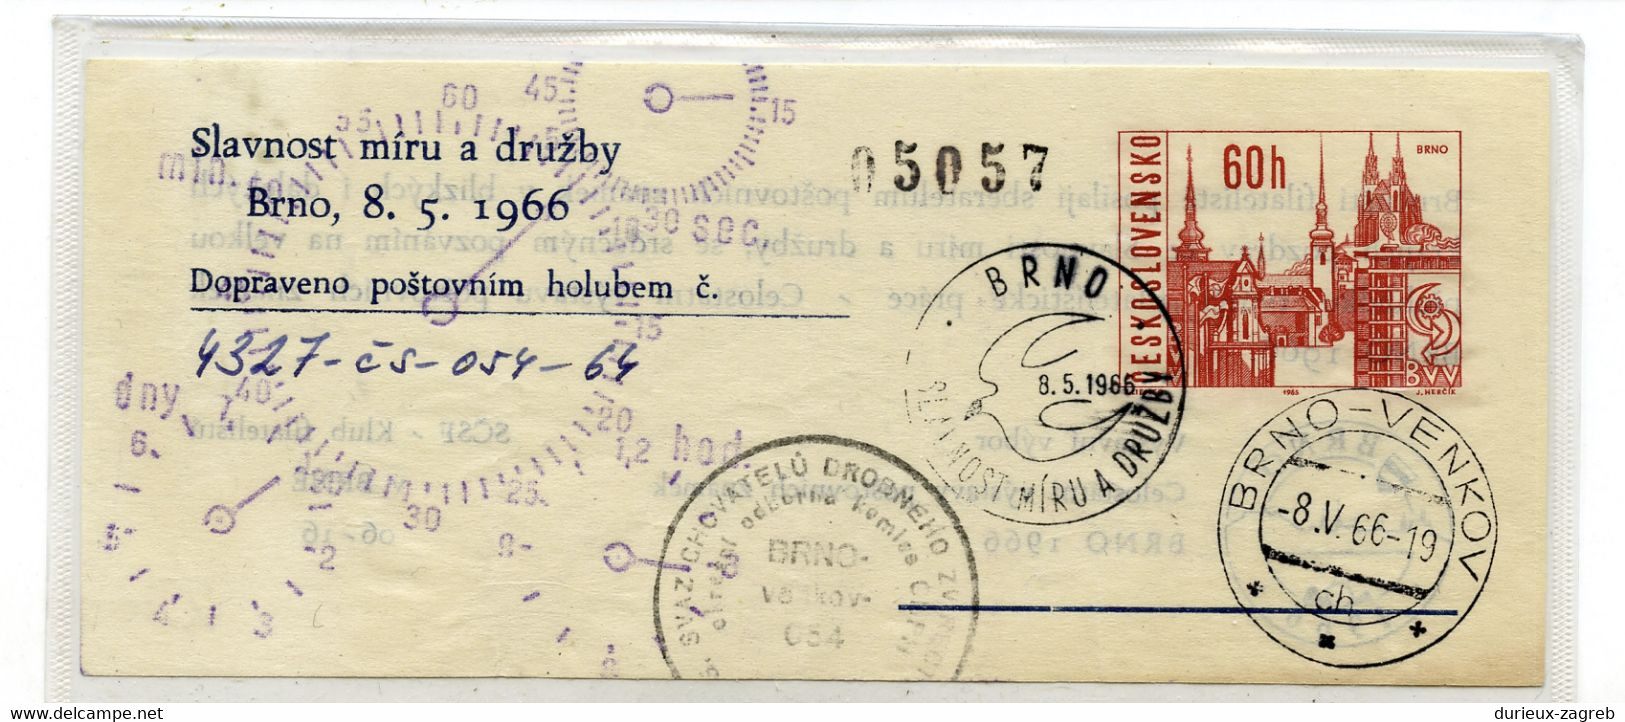 Czechoslovakia Pigeon Post Postal Stationery Letter Posted By Pigeon Brno 1966 B230205 - Aerogramme